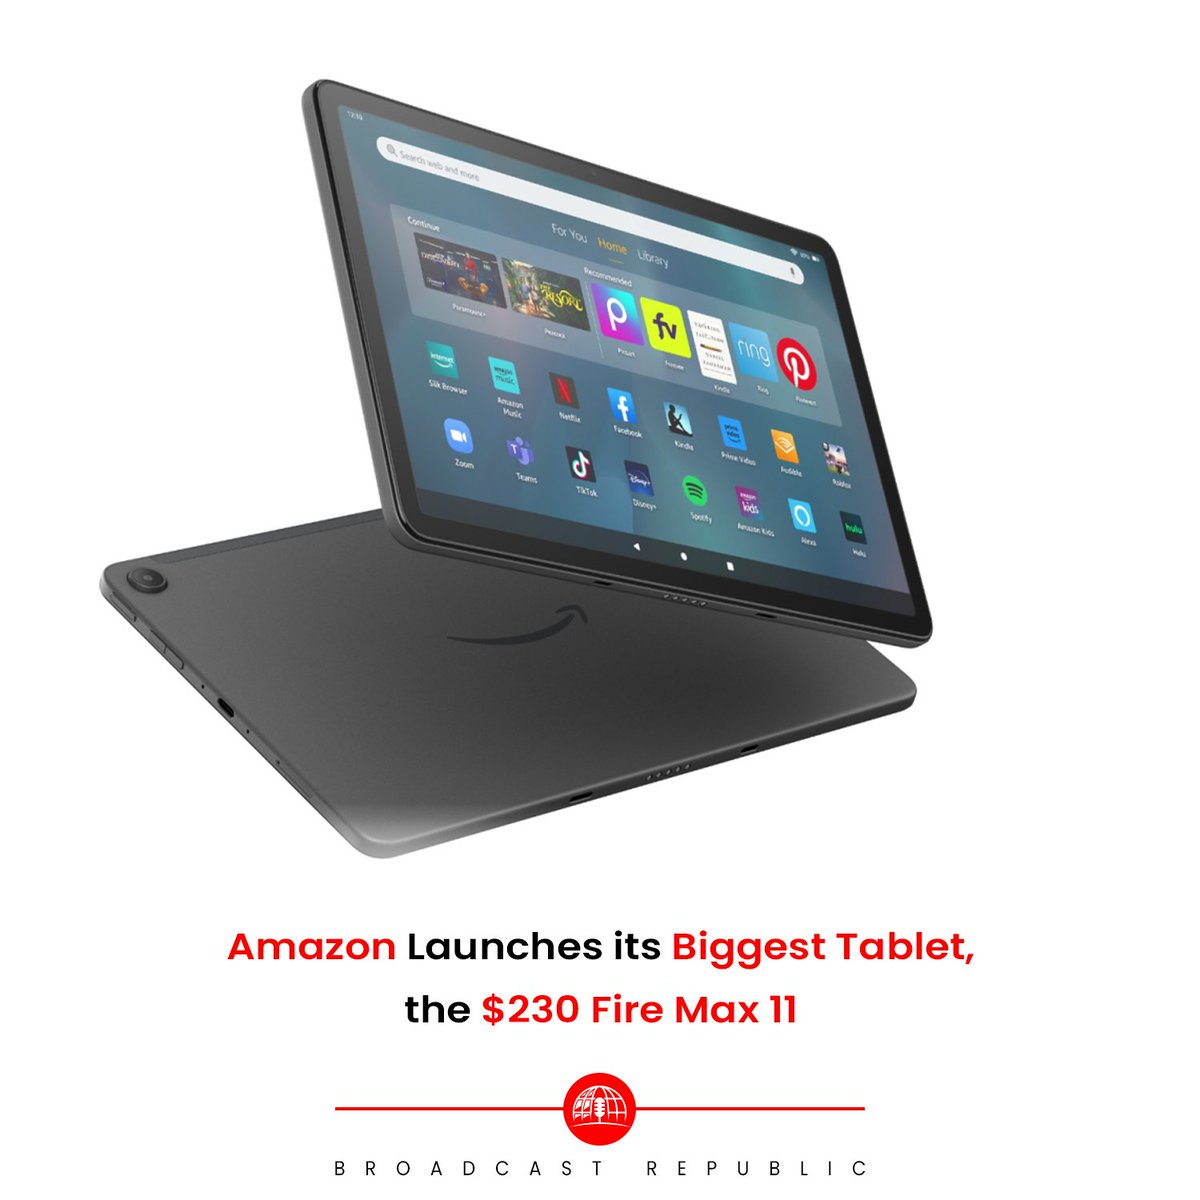 Amazon's latest release, the Fire Max 11, offers an impressive 11-inch screen and a price tag of $229.99, challenging competitors in the tablet market. 

#BroadcastRepublic #Amazon #FireMax11 #TabletLaunch #BudgetFriendlyTech #ImpressiveDisplay #ProductivityOnTheGo